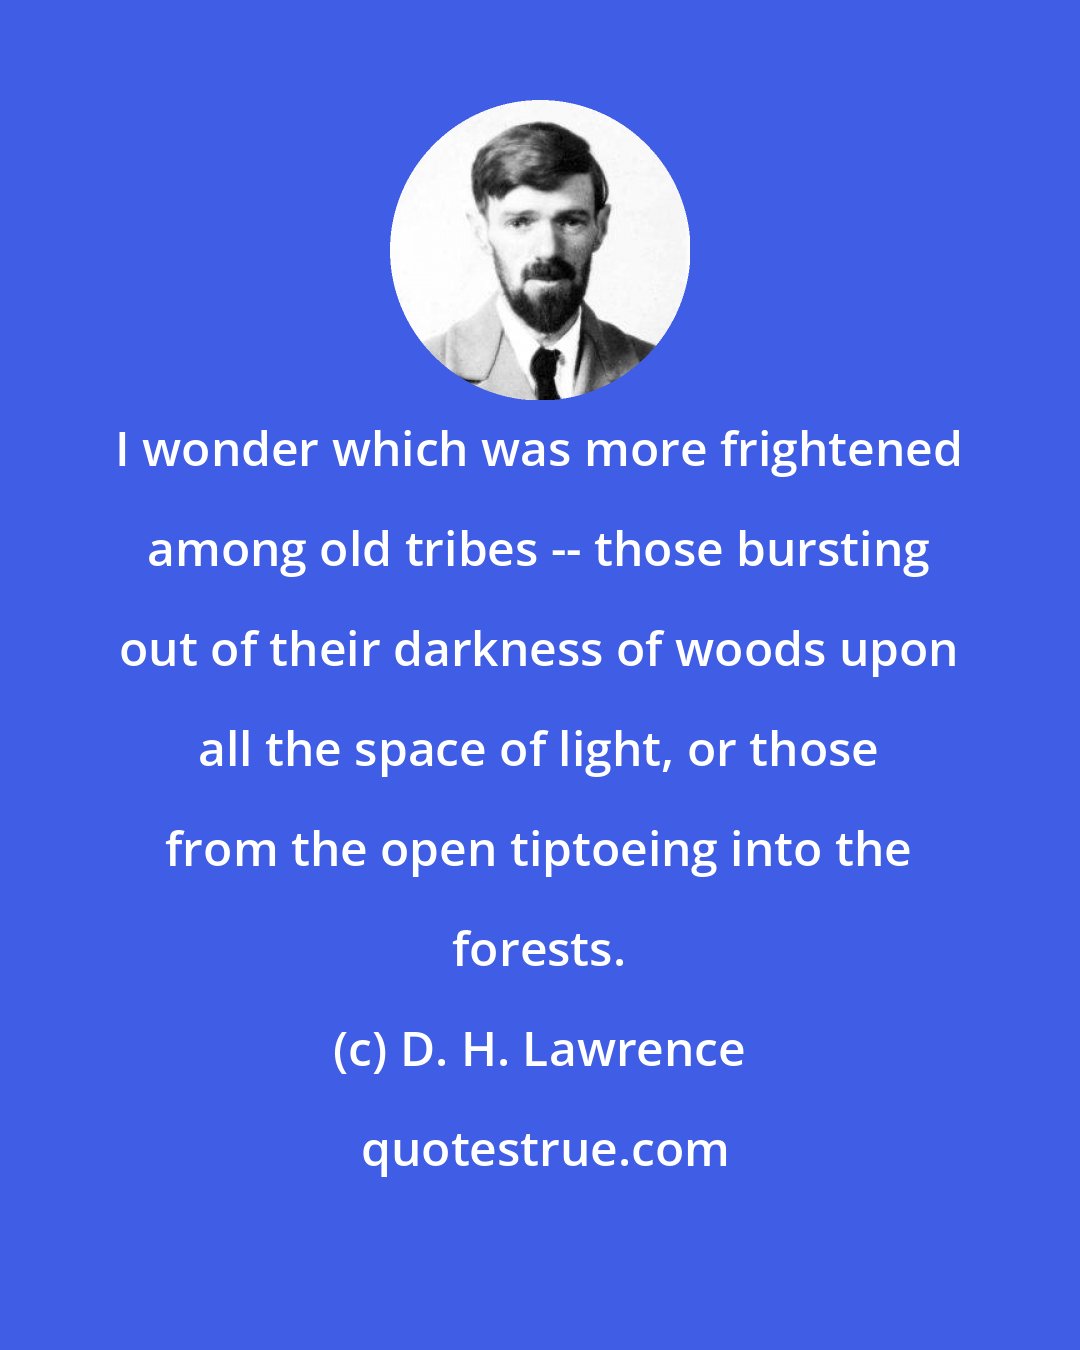 D. H. Lawrence: I wonder which was more frightened among old tribes -- those bursting out of their darkness of woods upon all the space of light, or those from the open tiptoeing into the forests.